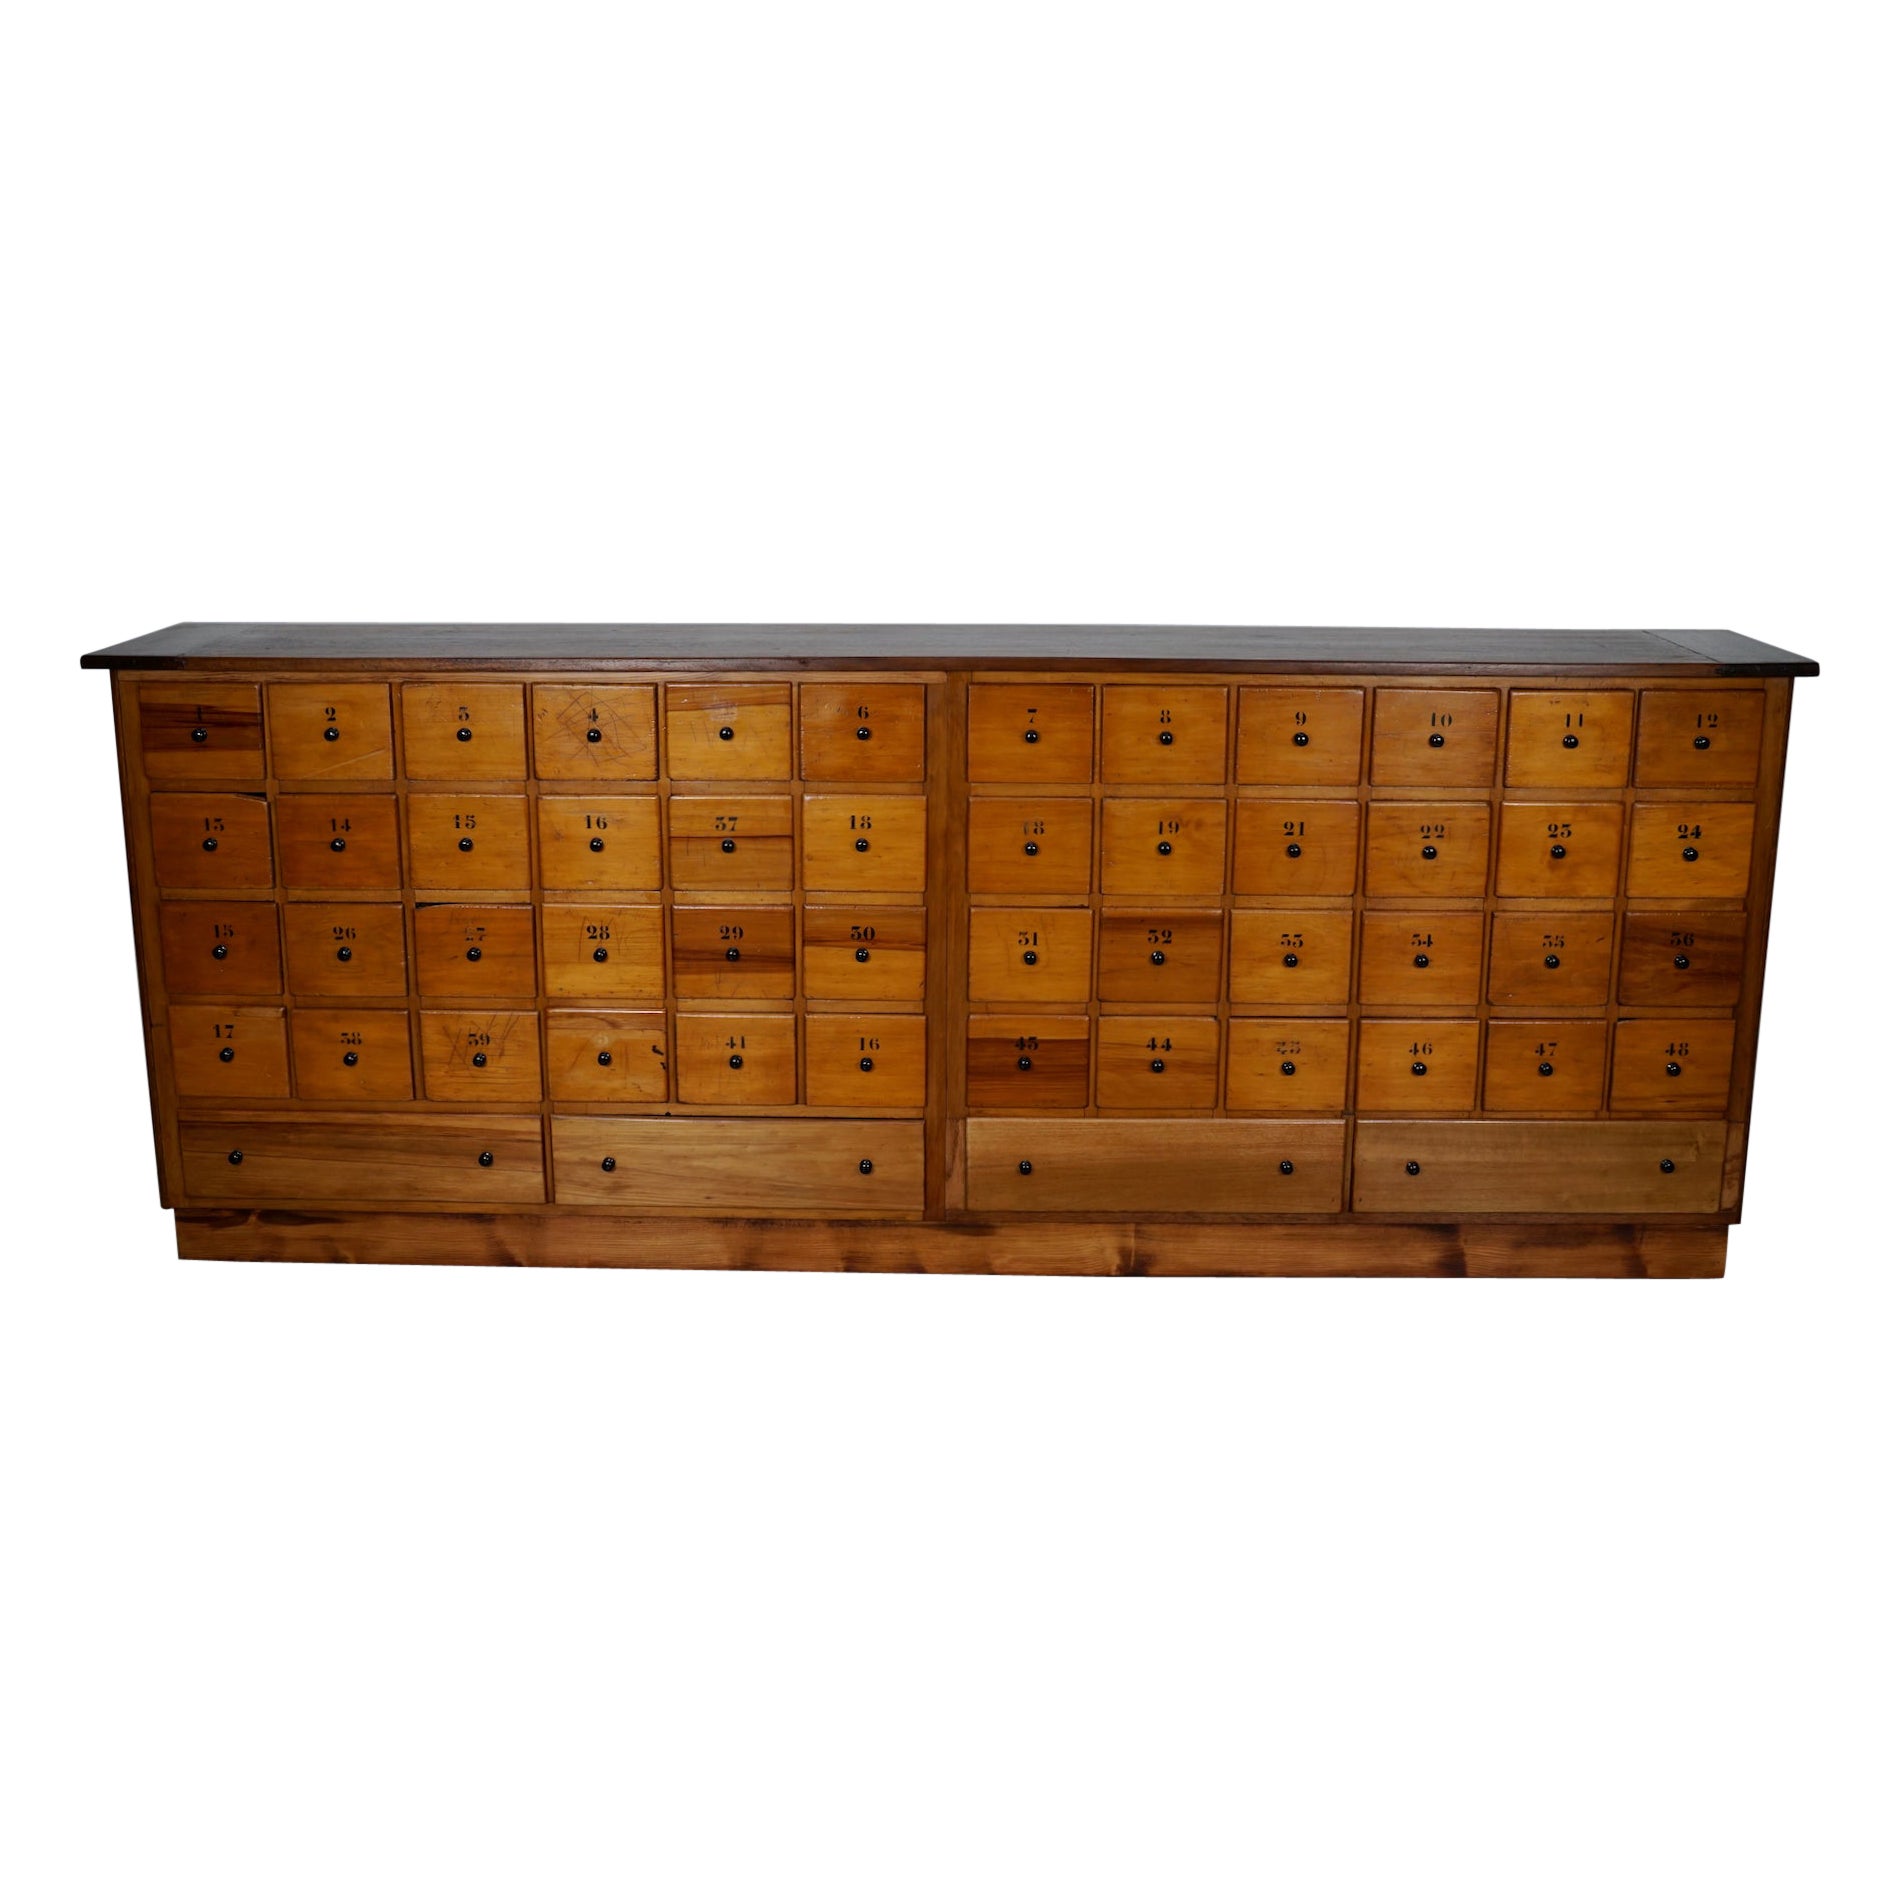 Large Dutch Industrial Beech Apothecary / School Cabinet, Mid-20th Century For Sale